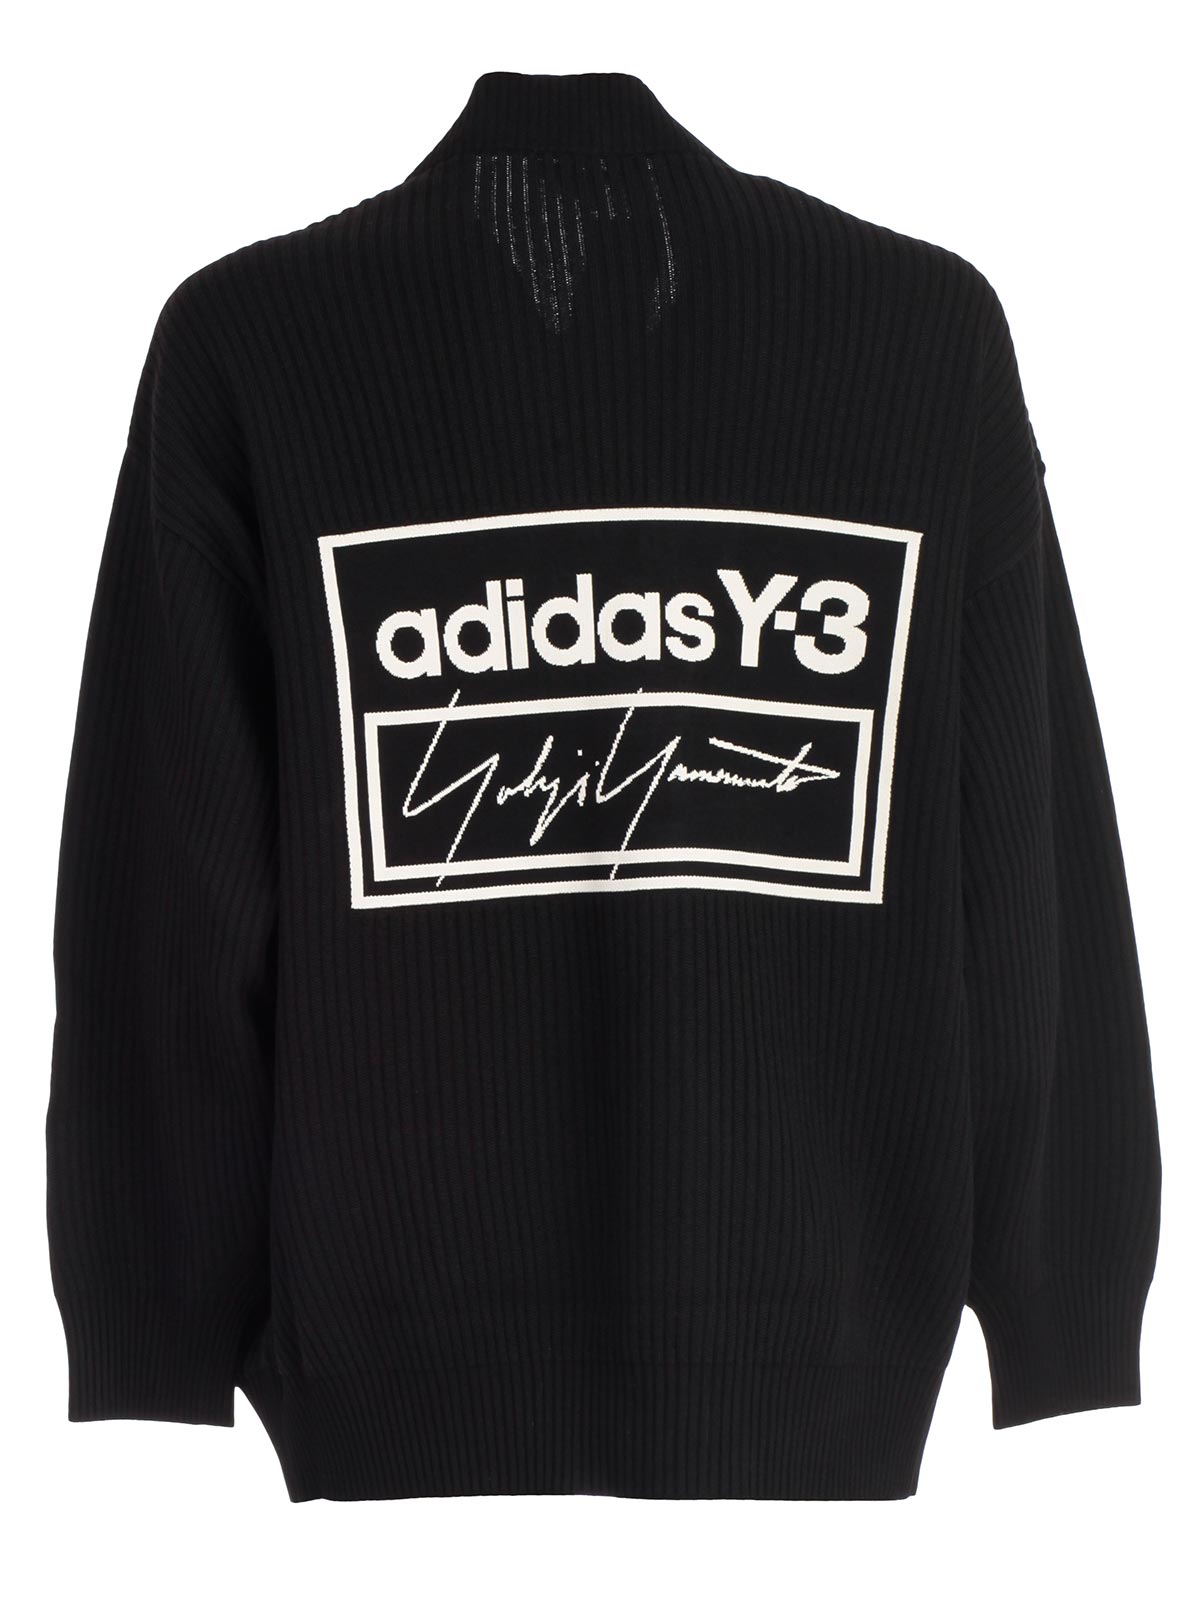 adidas y3 sweater cheap online